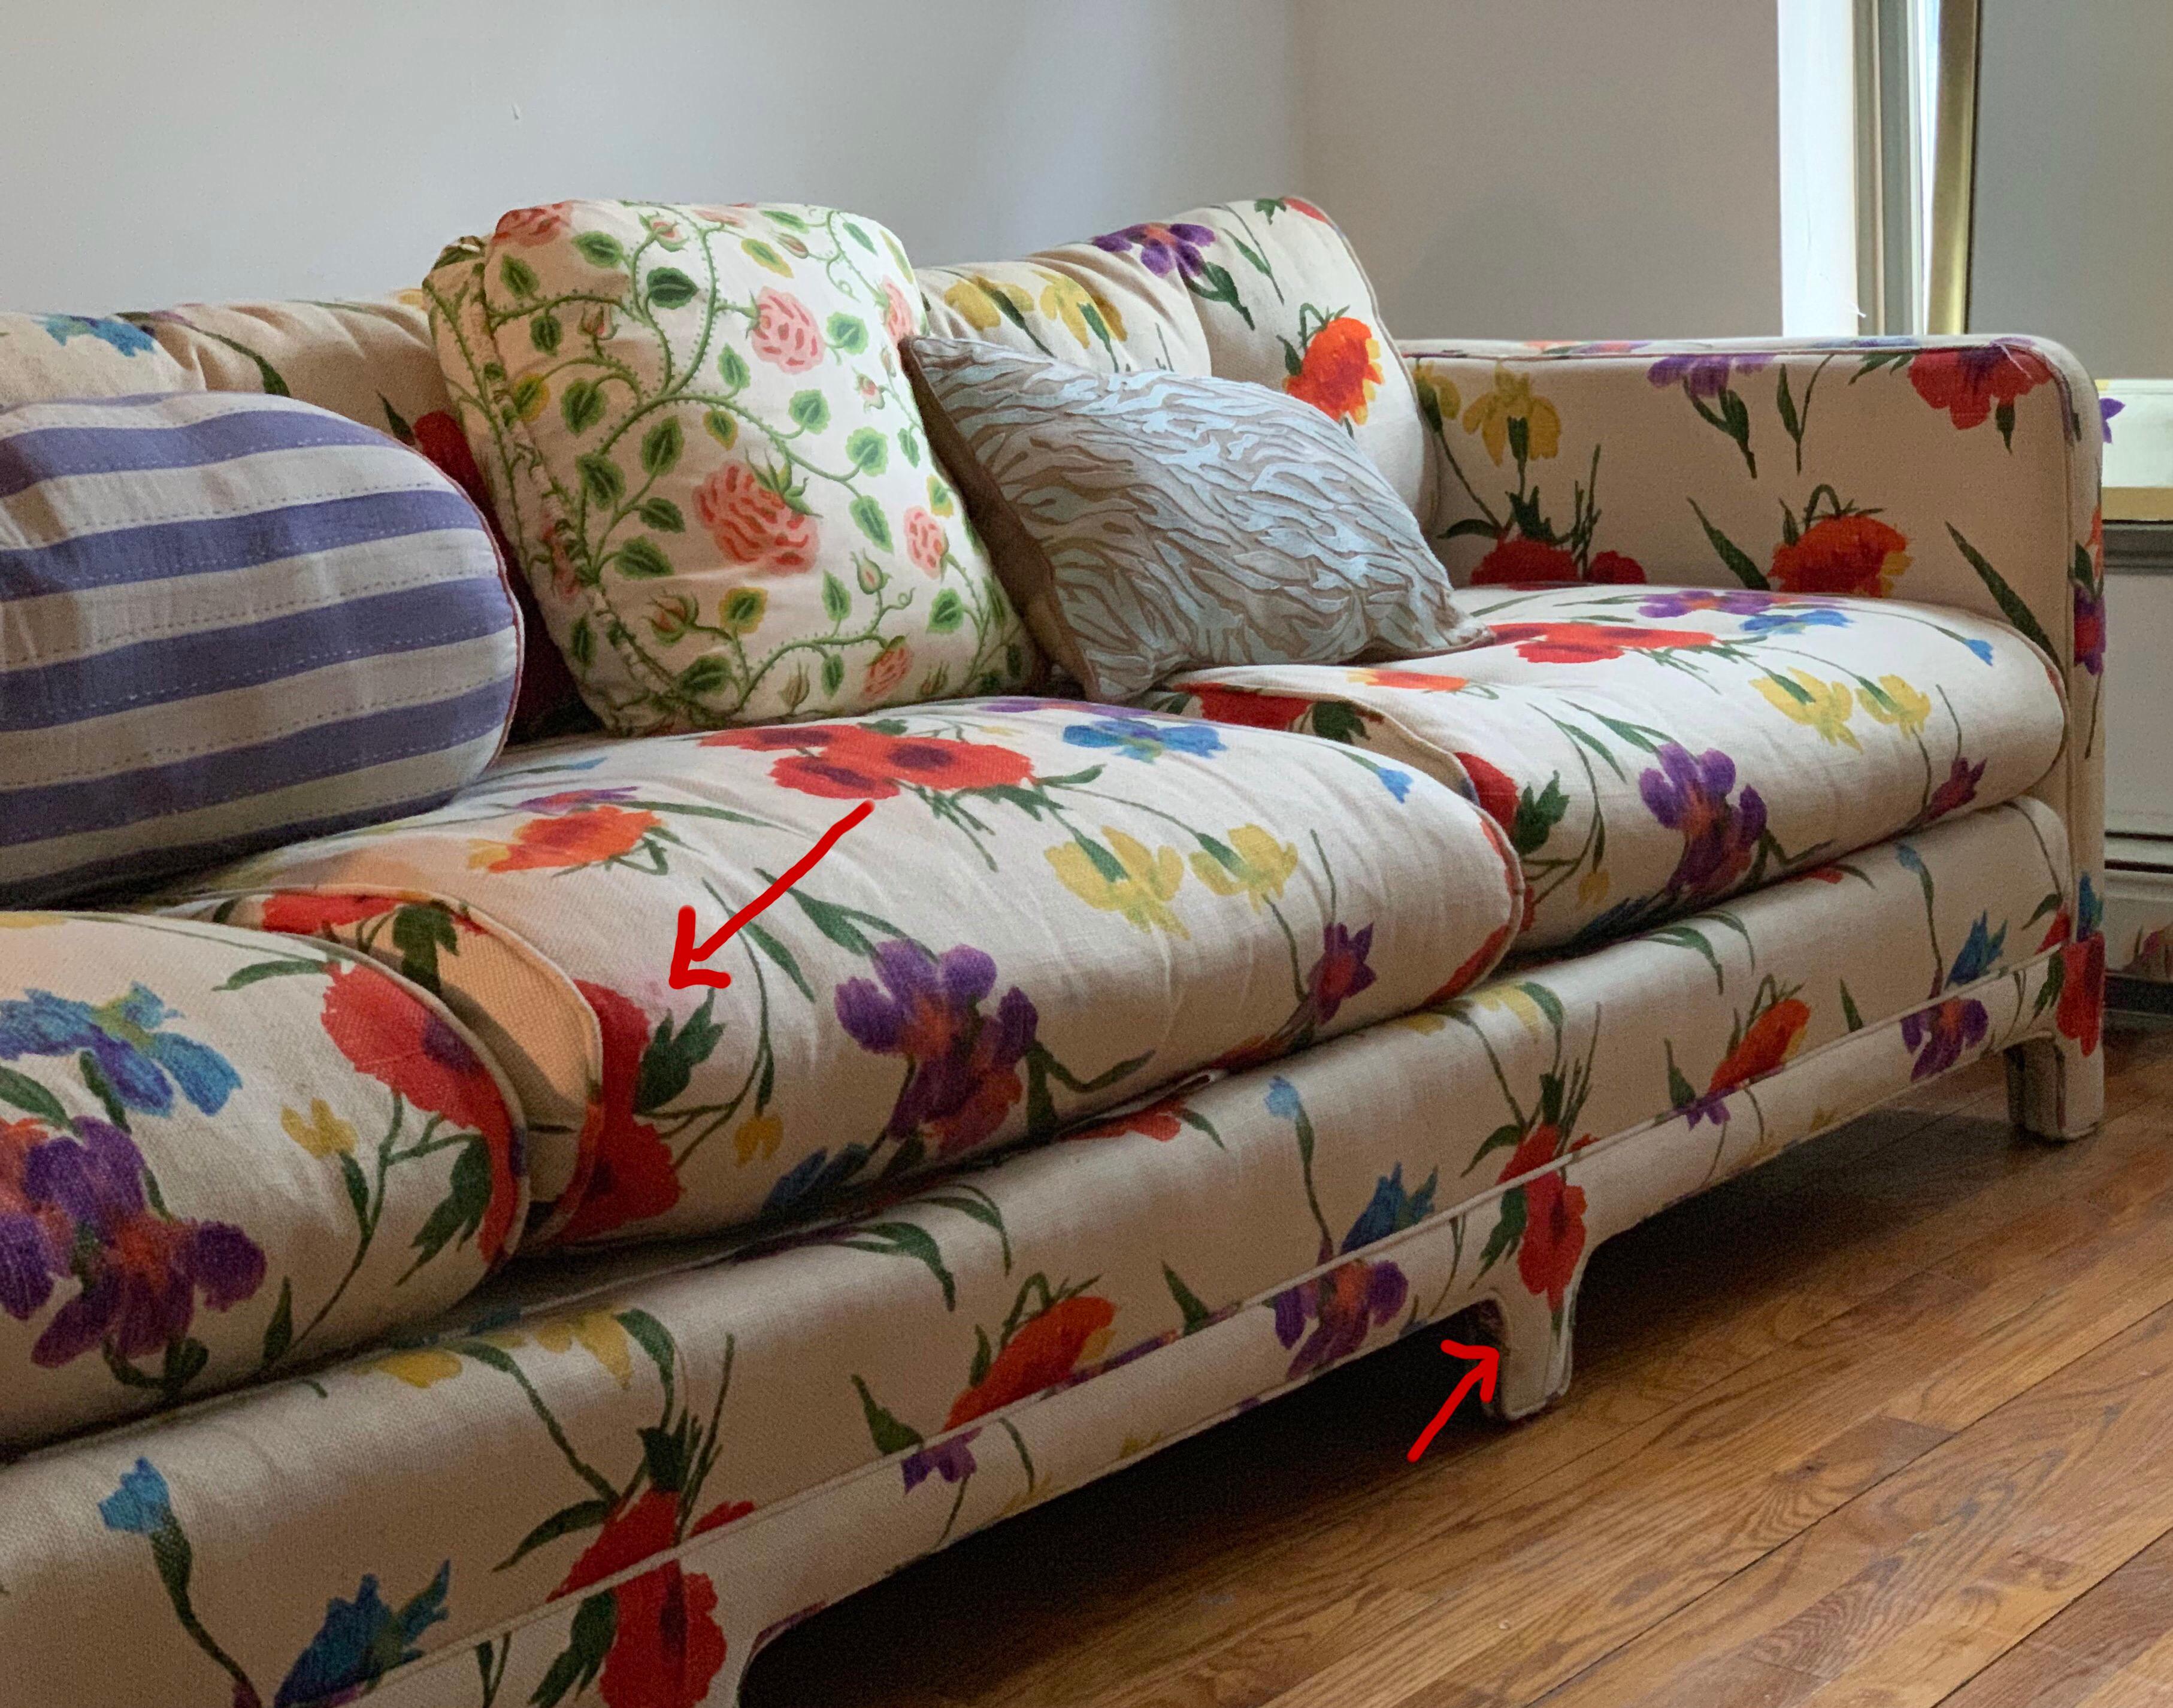 Mid-Century Modern W J Sloane Spring Floral Poppy Iris & Daffodil Sofa Sectional

W. & J. Sloane, New York 
Poppy, Iris and Daffodil Sofa Sectional 
c. 1960; with tags. 
Larger section: 90” x 34” x 25”

Stunning sectional set from the illustrious W